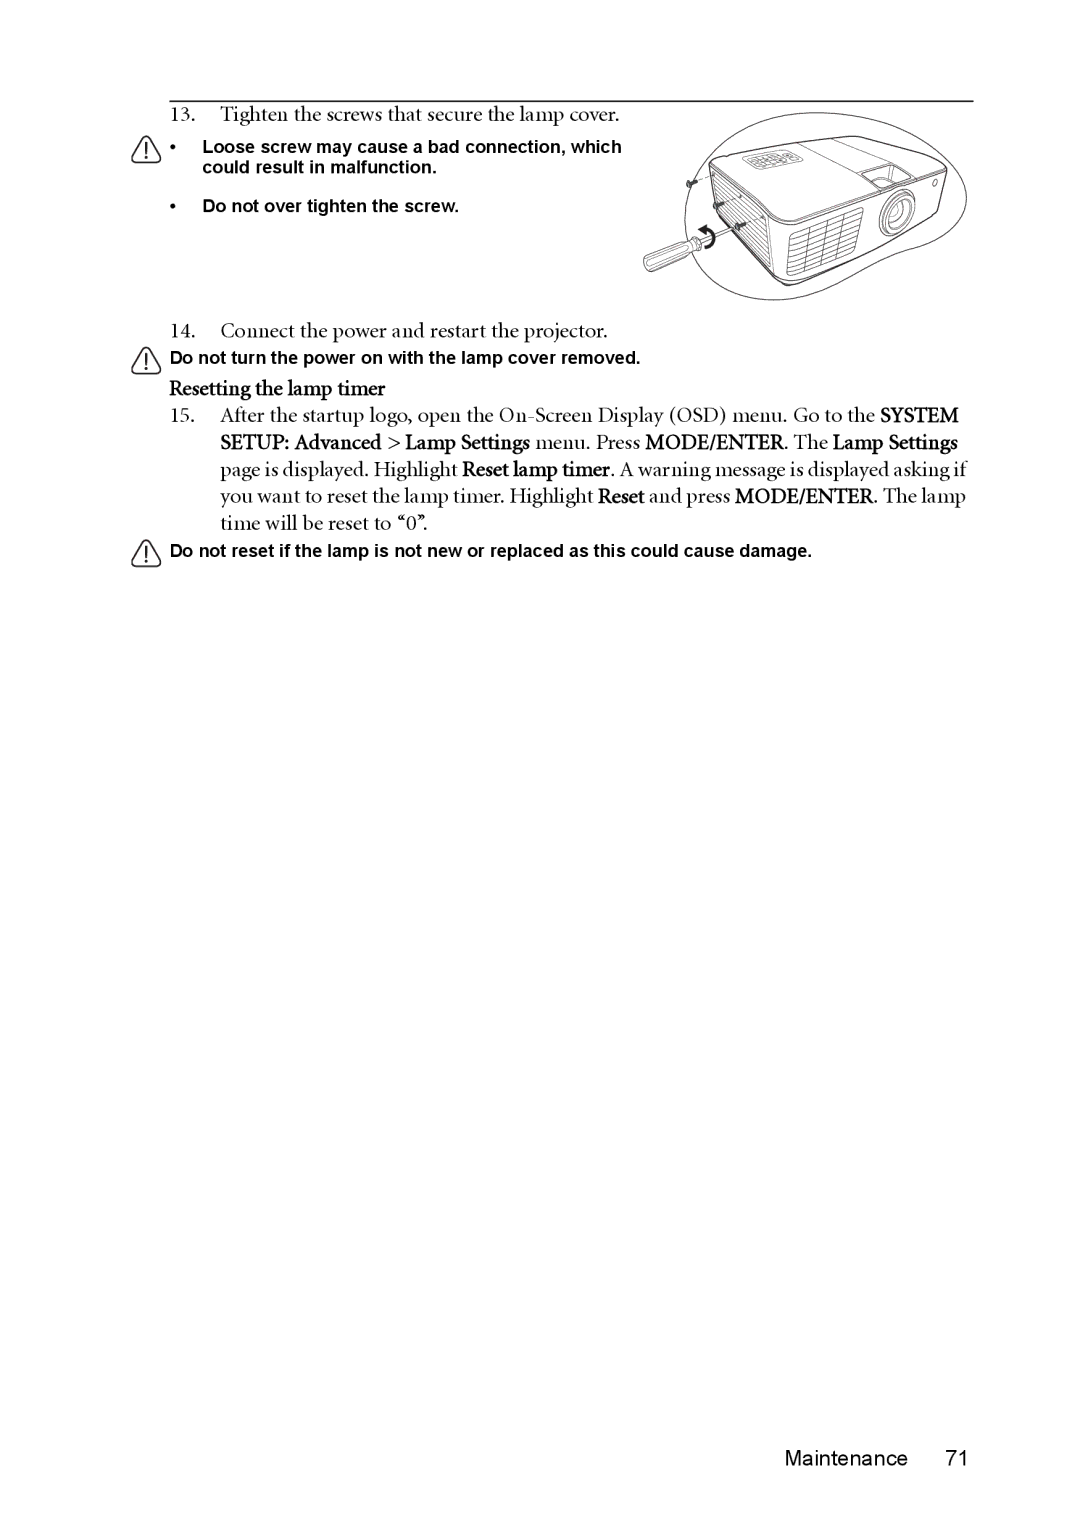 BenQ MX764 user manual Tighten the screws that secure the lamp cover, Resetting the lamp timer 